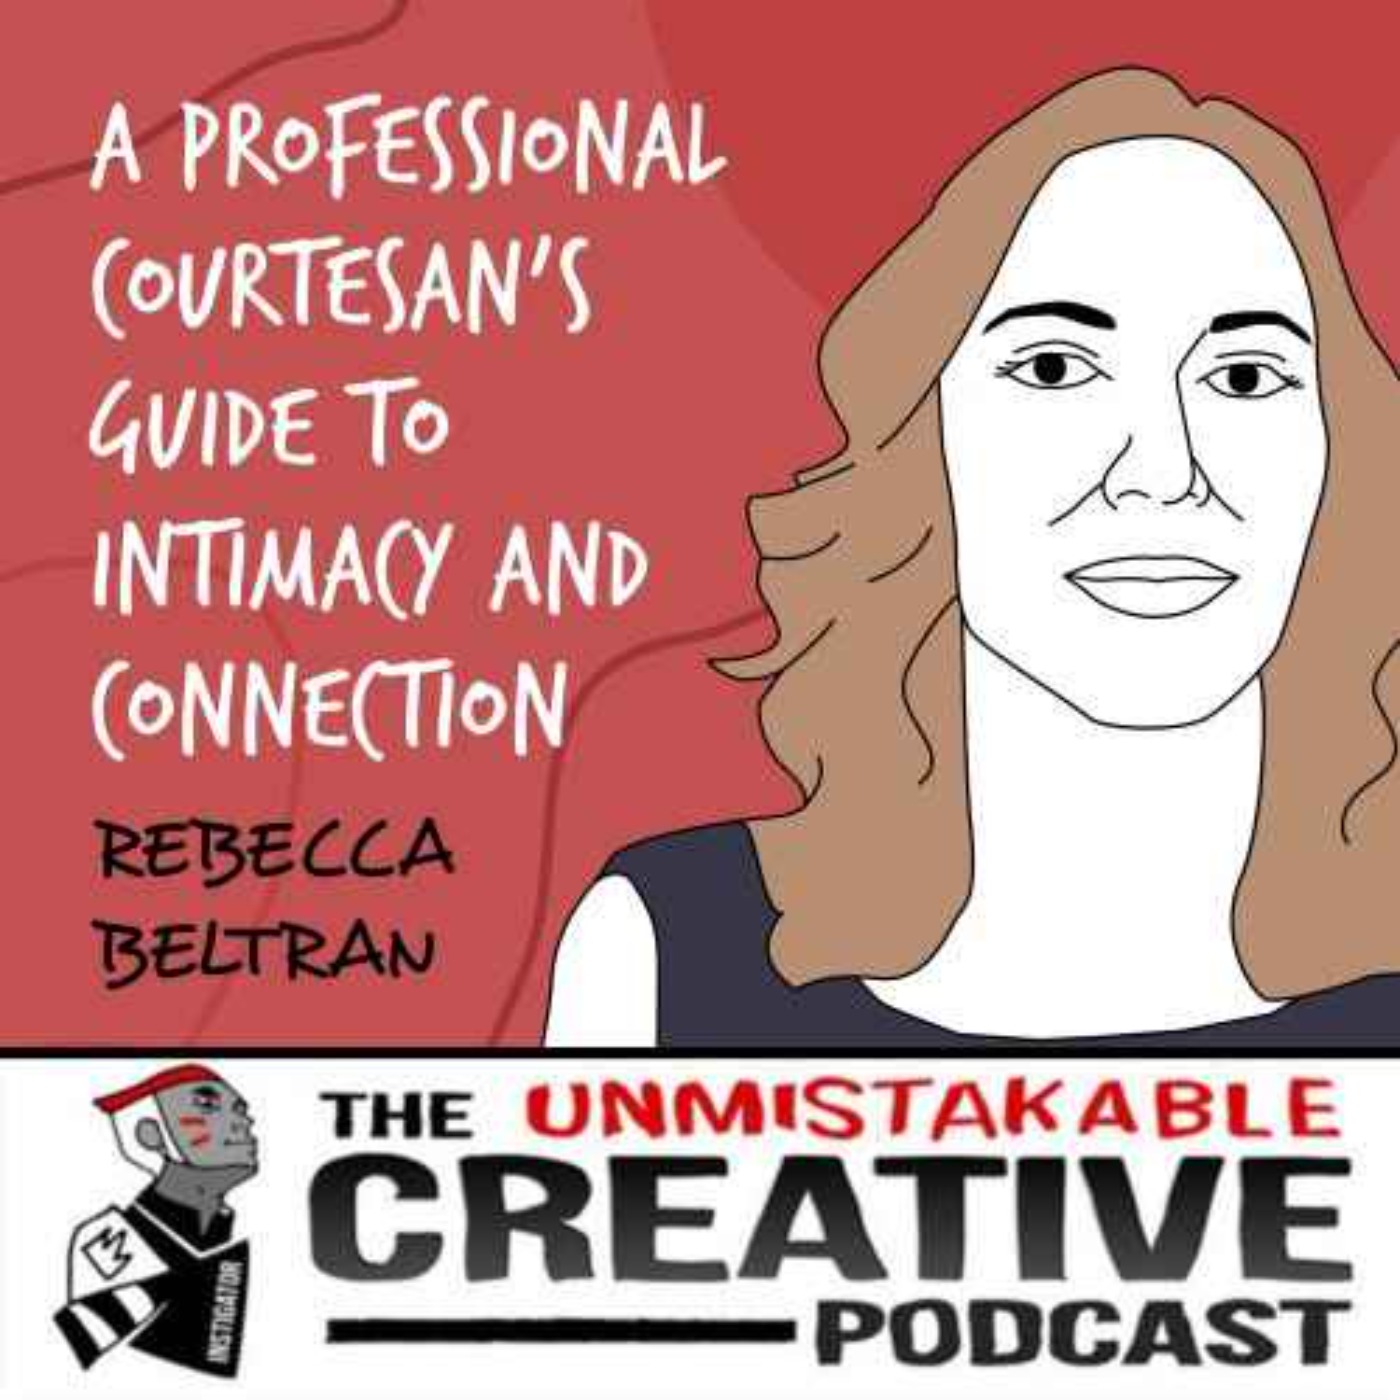 Listener Favorites: Rebecca Beltran | A Professional Courtesan's Guide to Intimacy and Connection Image